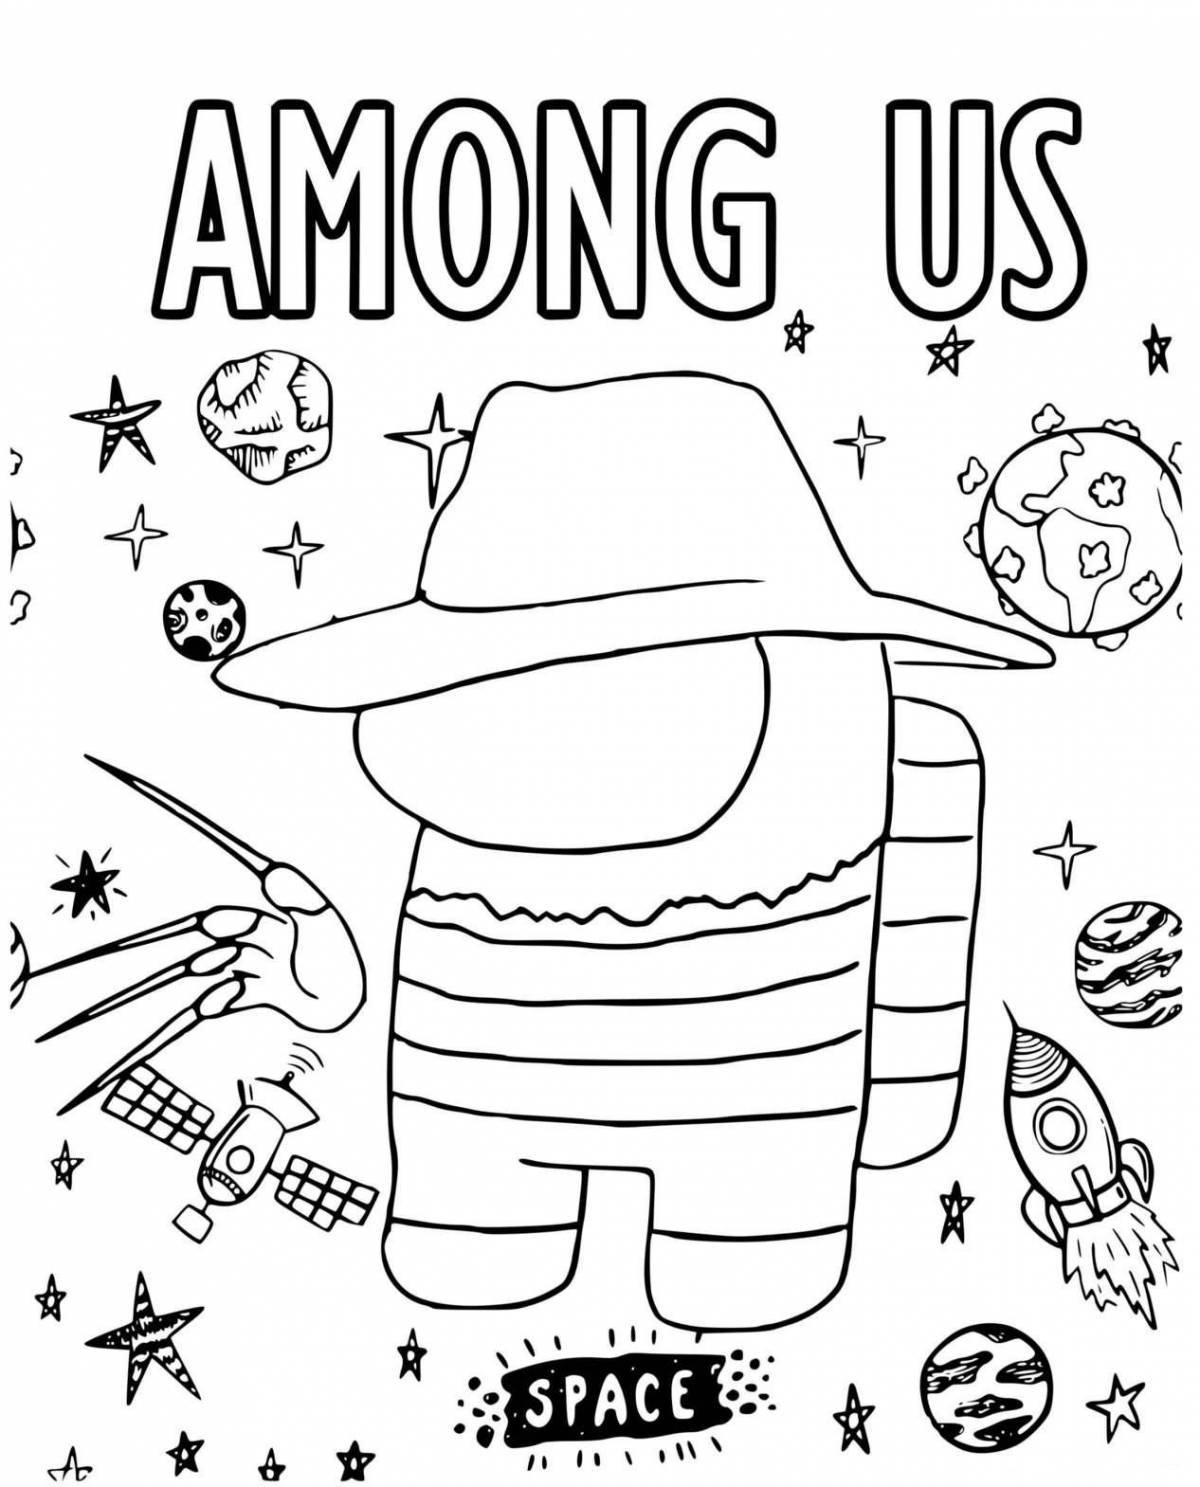 The Merry Among Us coloring page